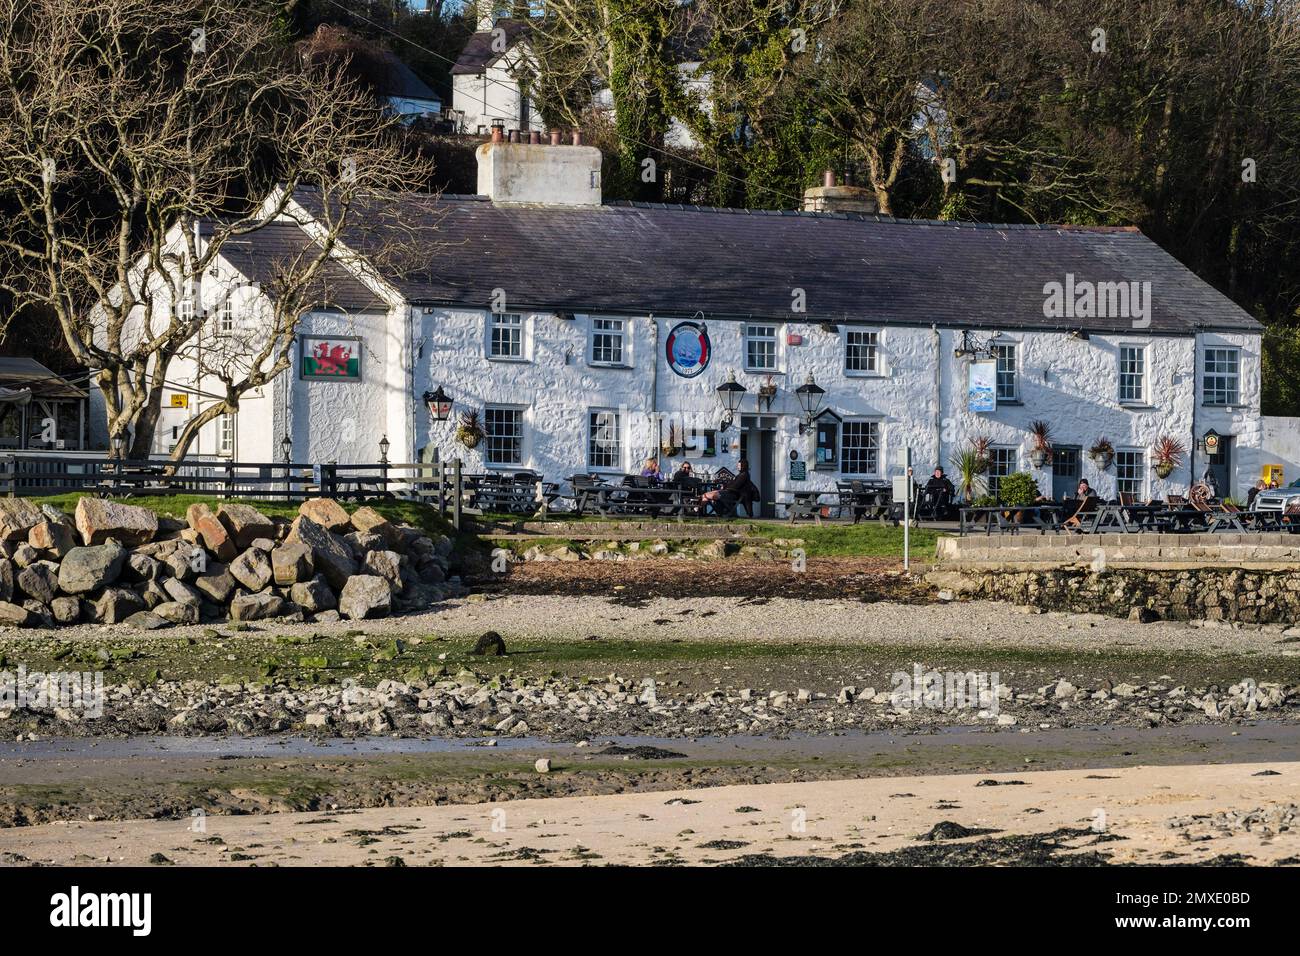 The Ship Inn is an 18th century pub on the seafront in Red Wharf Bay (Traeth Coch), Isle of Anglesey (Ynys Mon), Wales, UK, Britain Stock Photo